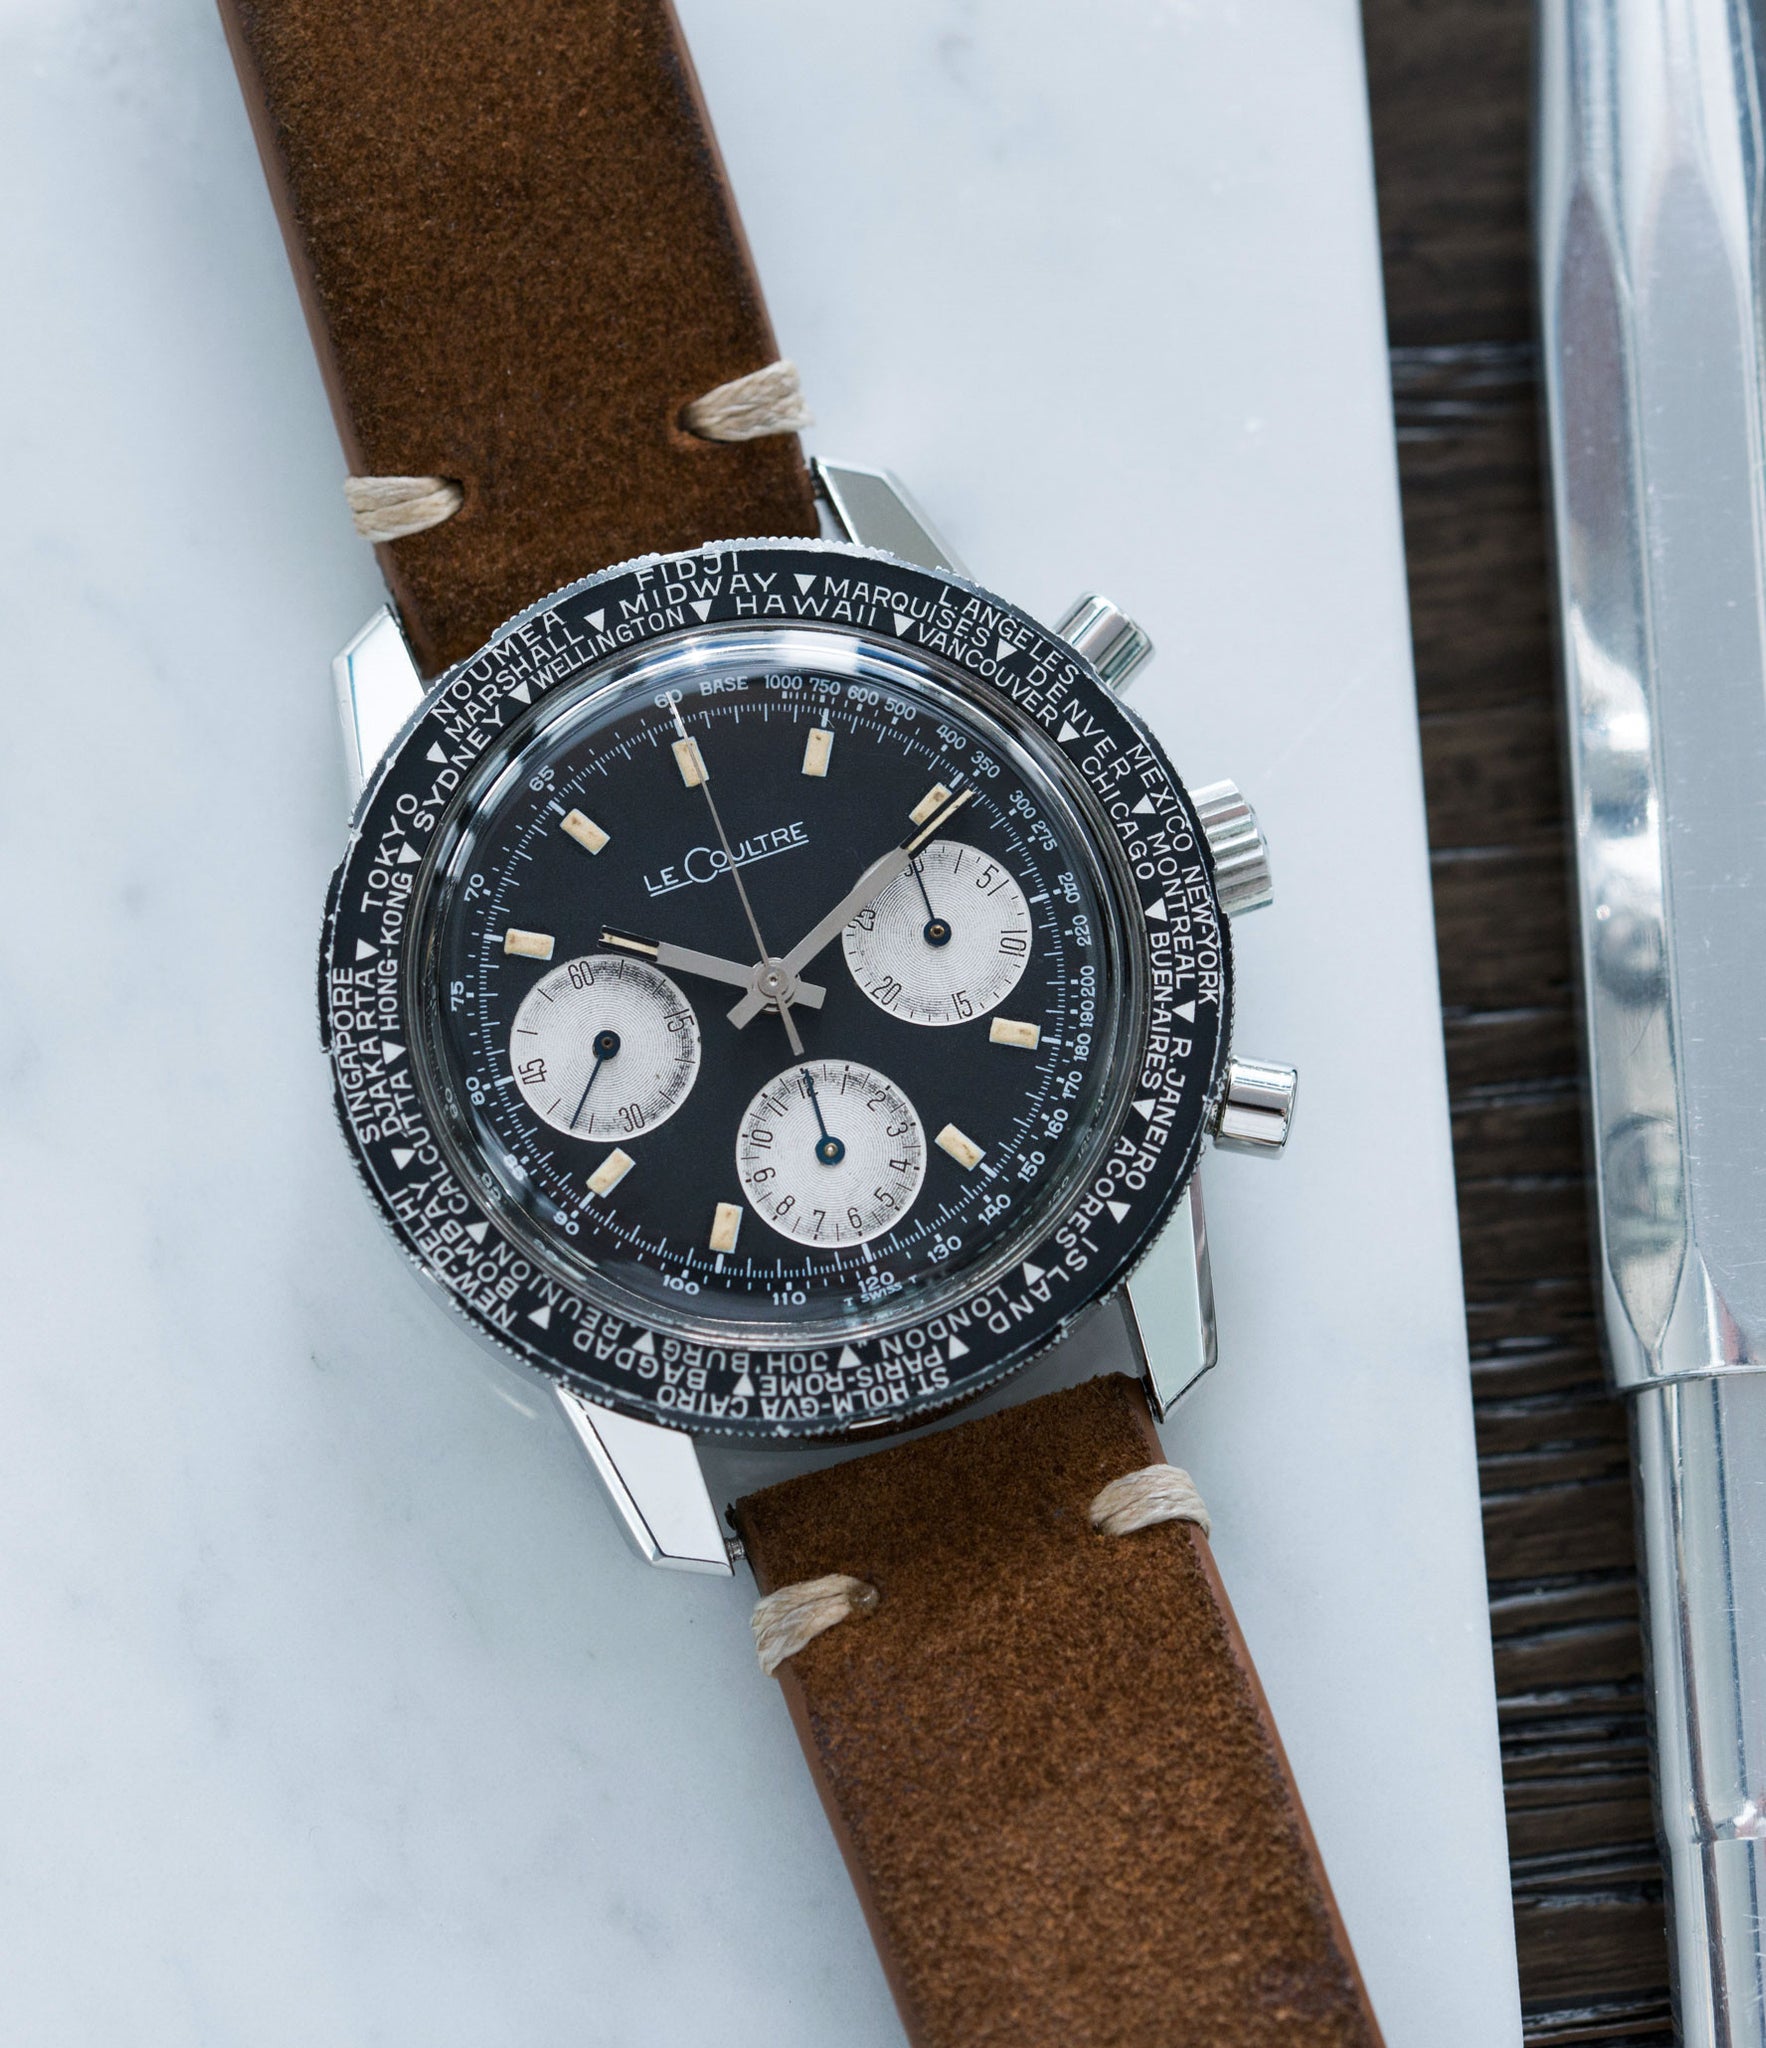 collect vintage watches LeCoultre Deep Sea Shark E2643 steel chronograph online at A Collected Man London vintage watch specialist